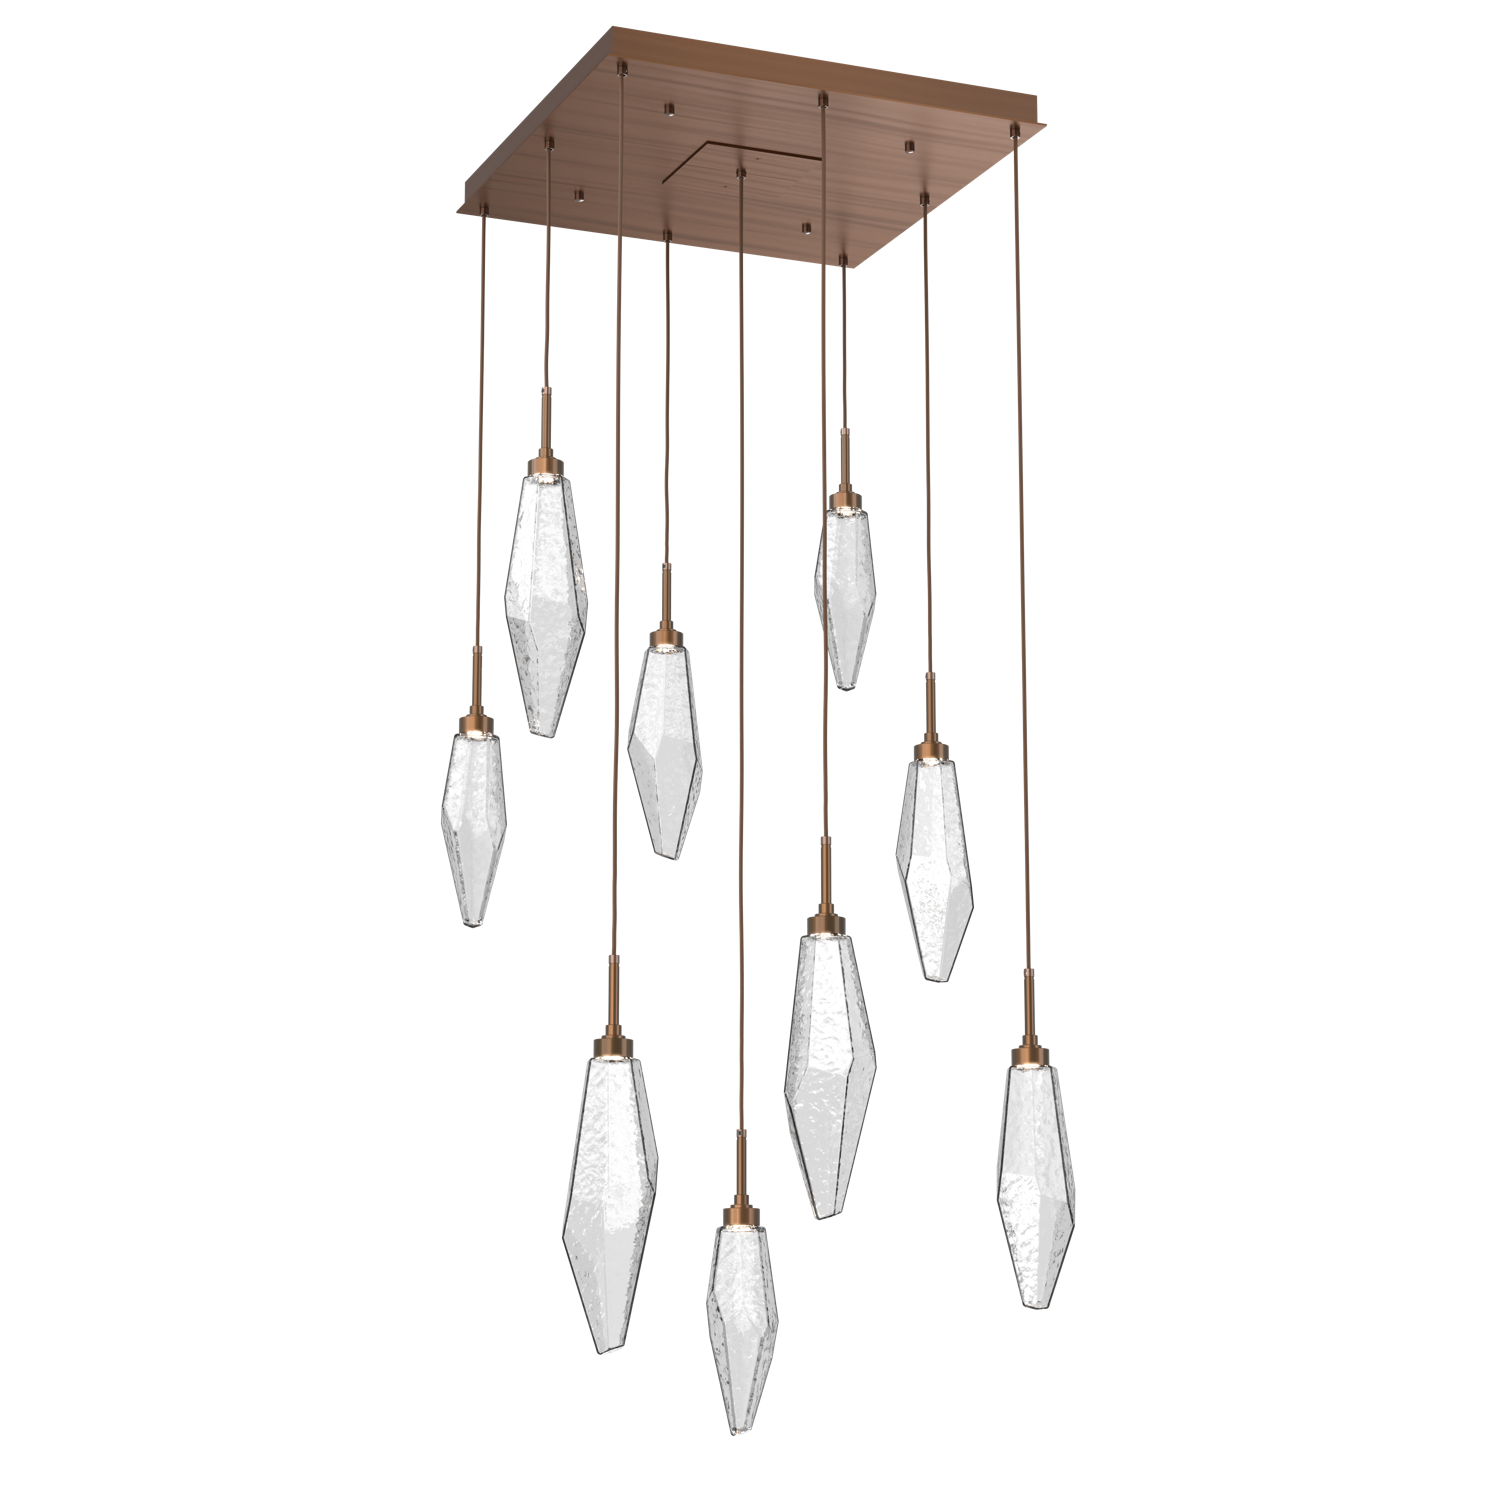 CHB0050-09-RB-CC-Hammerton-Studio-Rock-Crystal-9-light-square-pendant-chandelier-with-oil-rubbed-bronze-finish-and-clear-glass-shades-and-LED-lamping